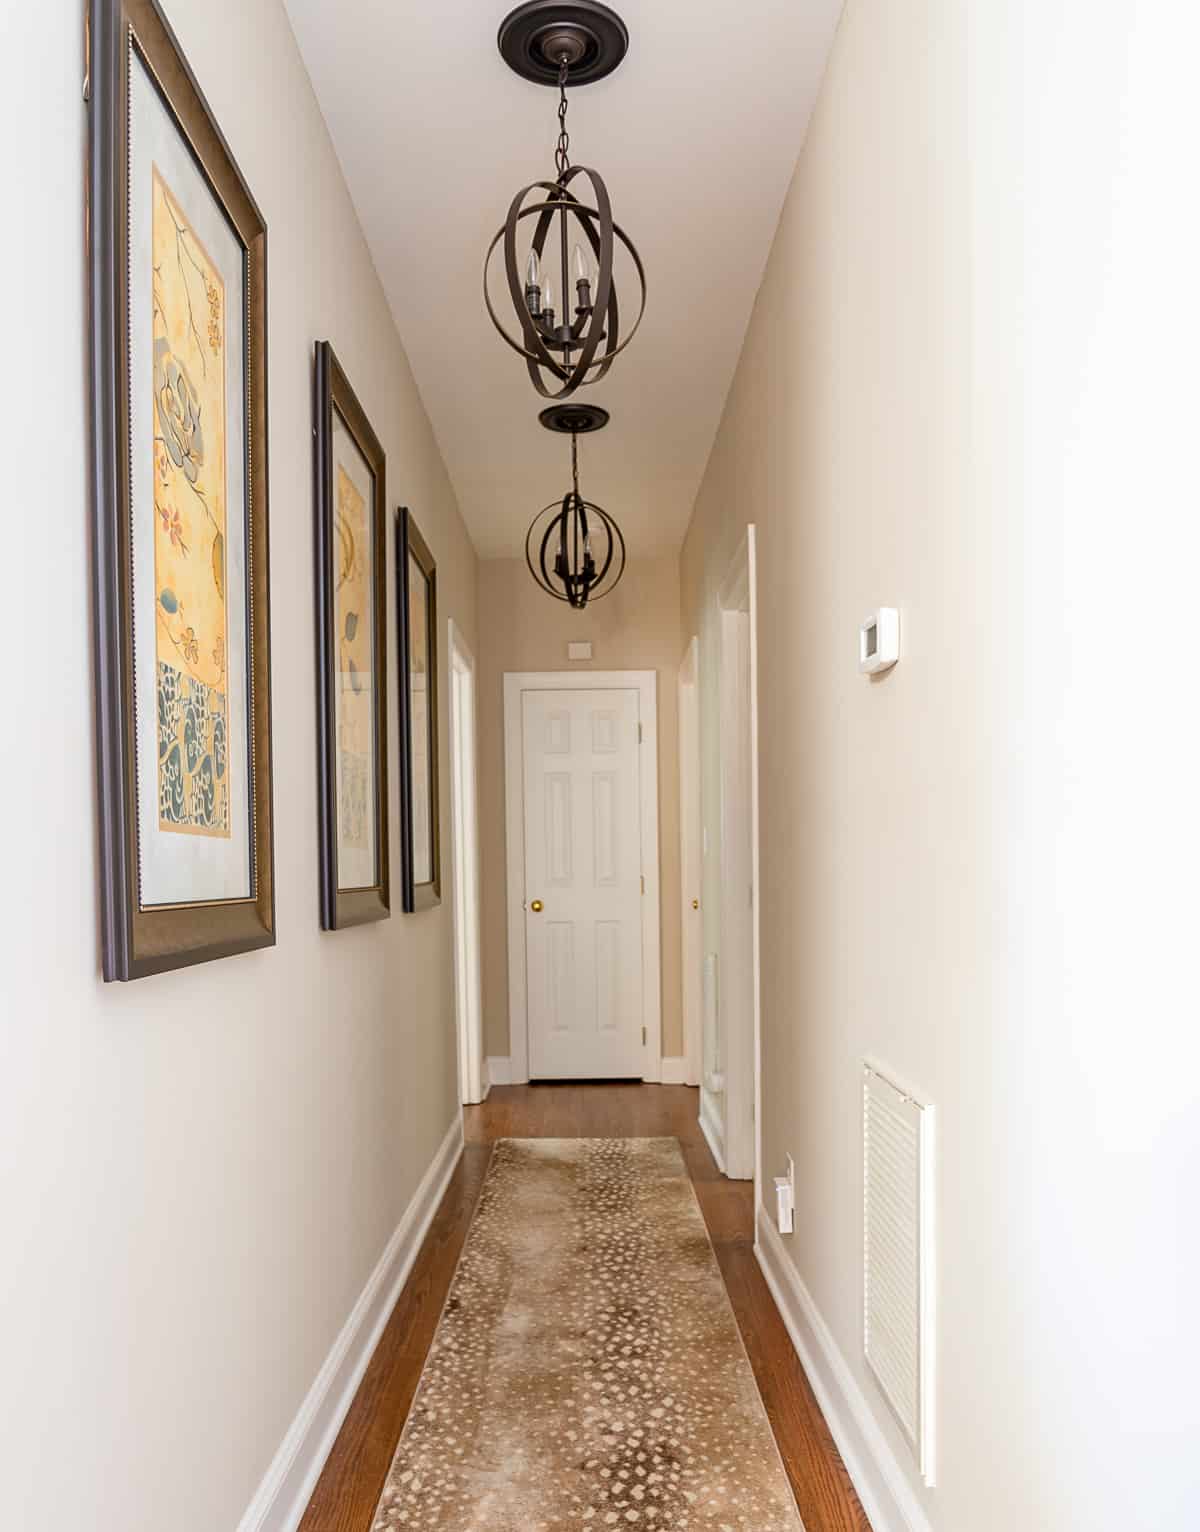 looking down a long hallway decorated with a set of 3 art prints and decorative pendant lights